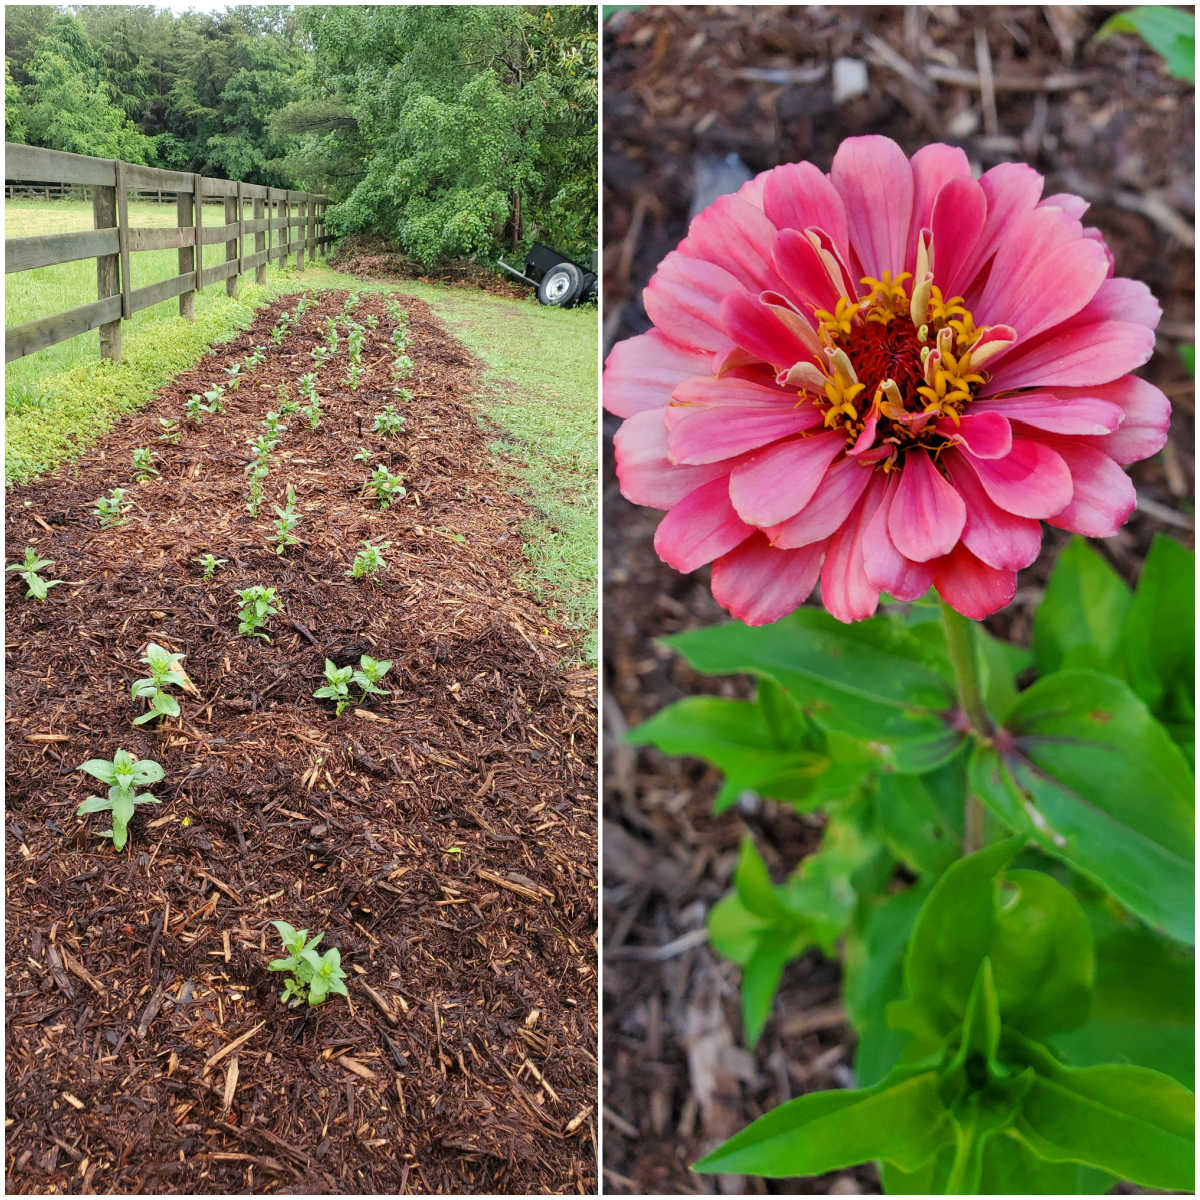 Zinnias lined up against horse fence in backyard, salmon color zinnia blooming.